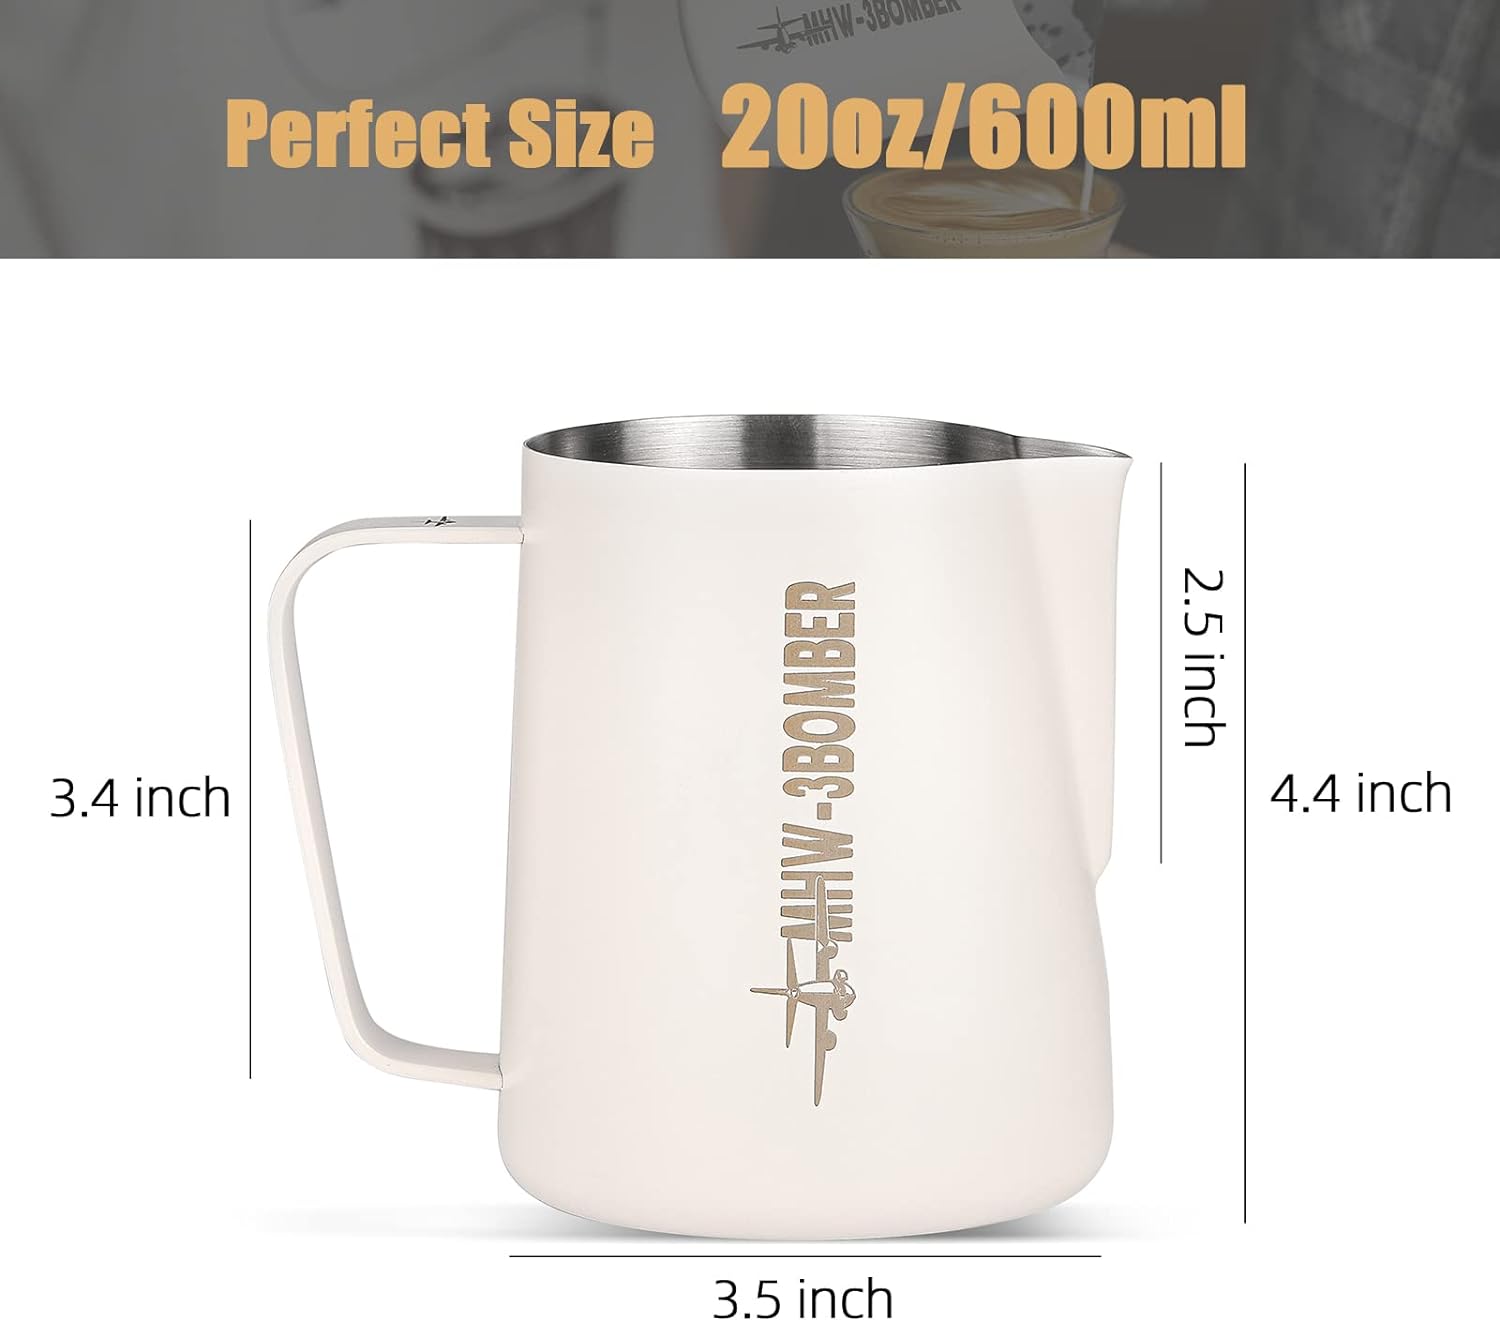 MHW-3BOMBER Milk Frothing Pitcher 16.9oz/500ml Espresso Steaming Pitcher Stainless Steel Frothing Cup Capuccino Latte Art Pitcher, Pink P5017